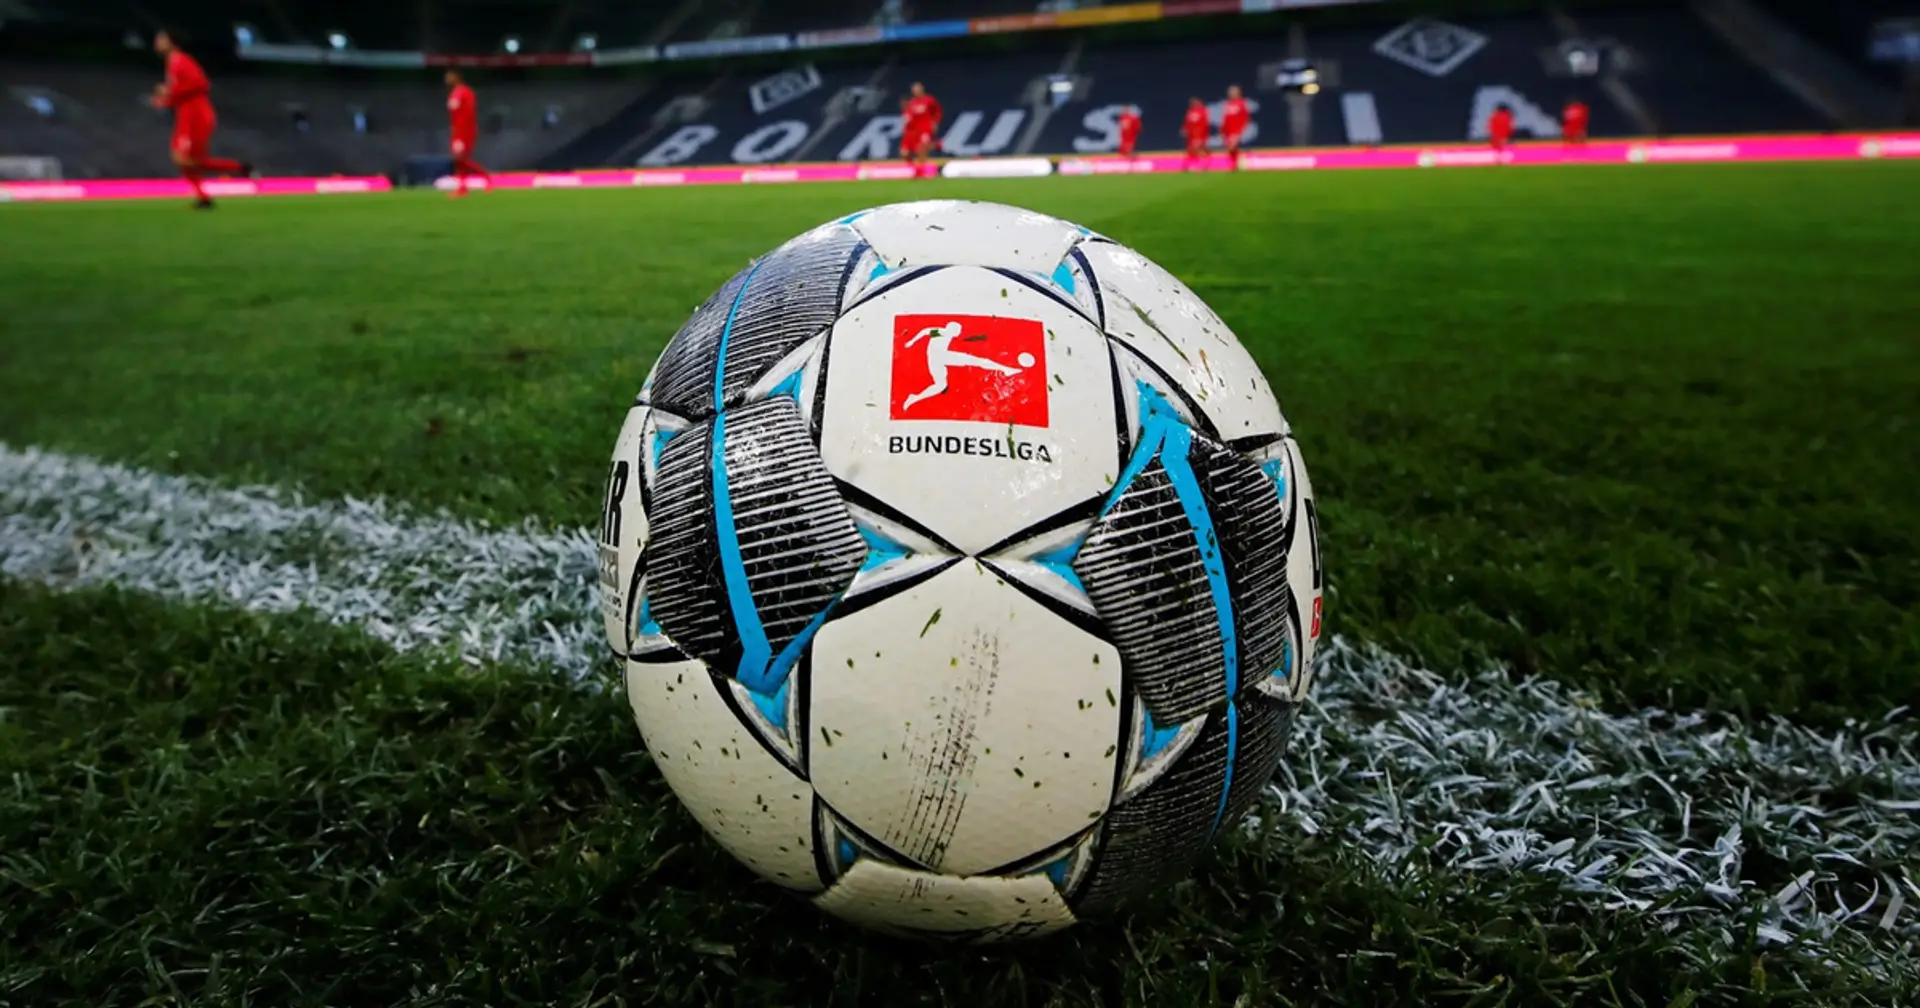 Bundesliga reportedly set to resume behind closed doors on May 9